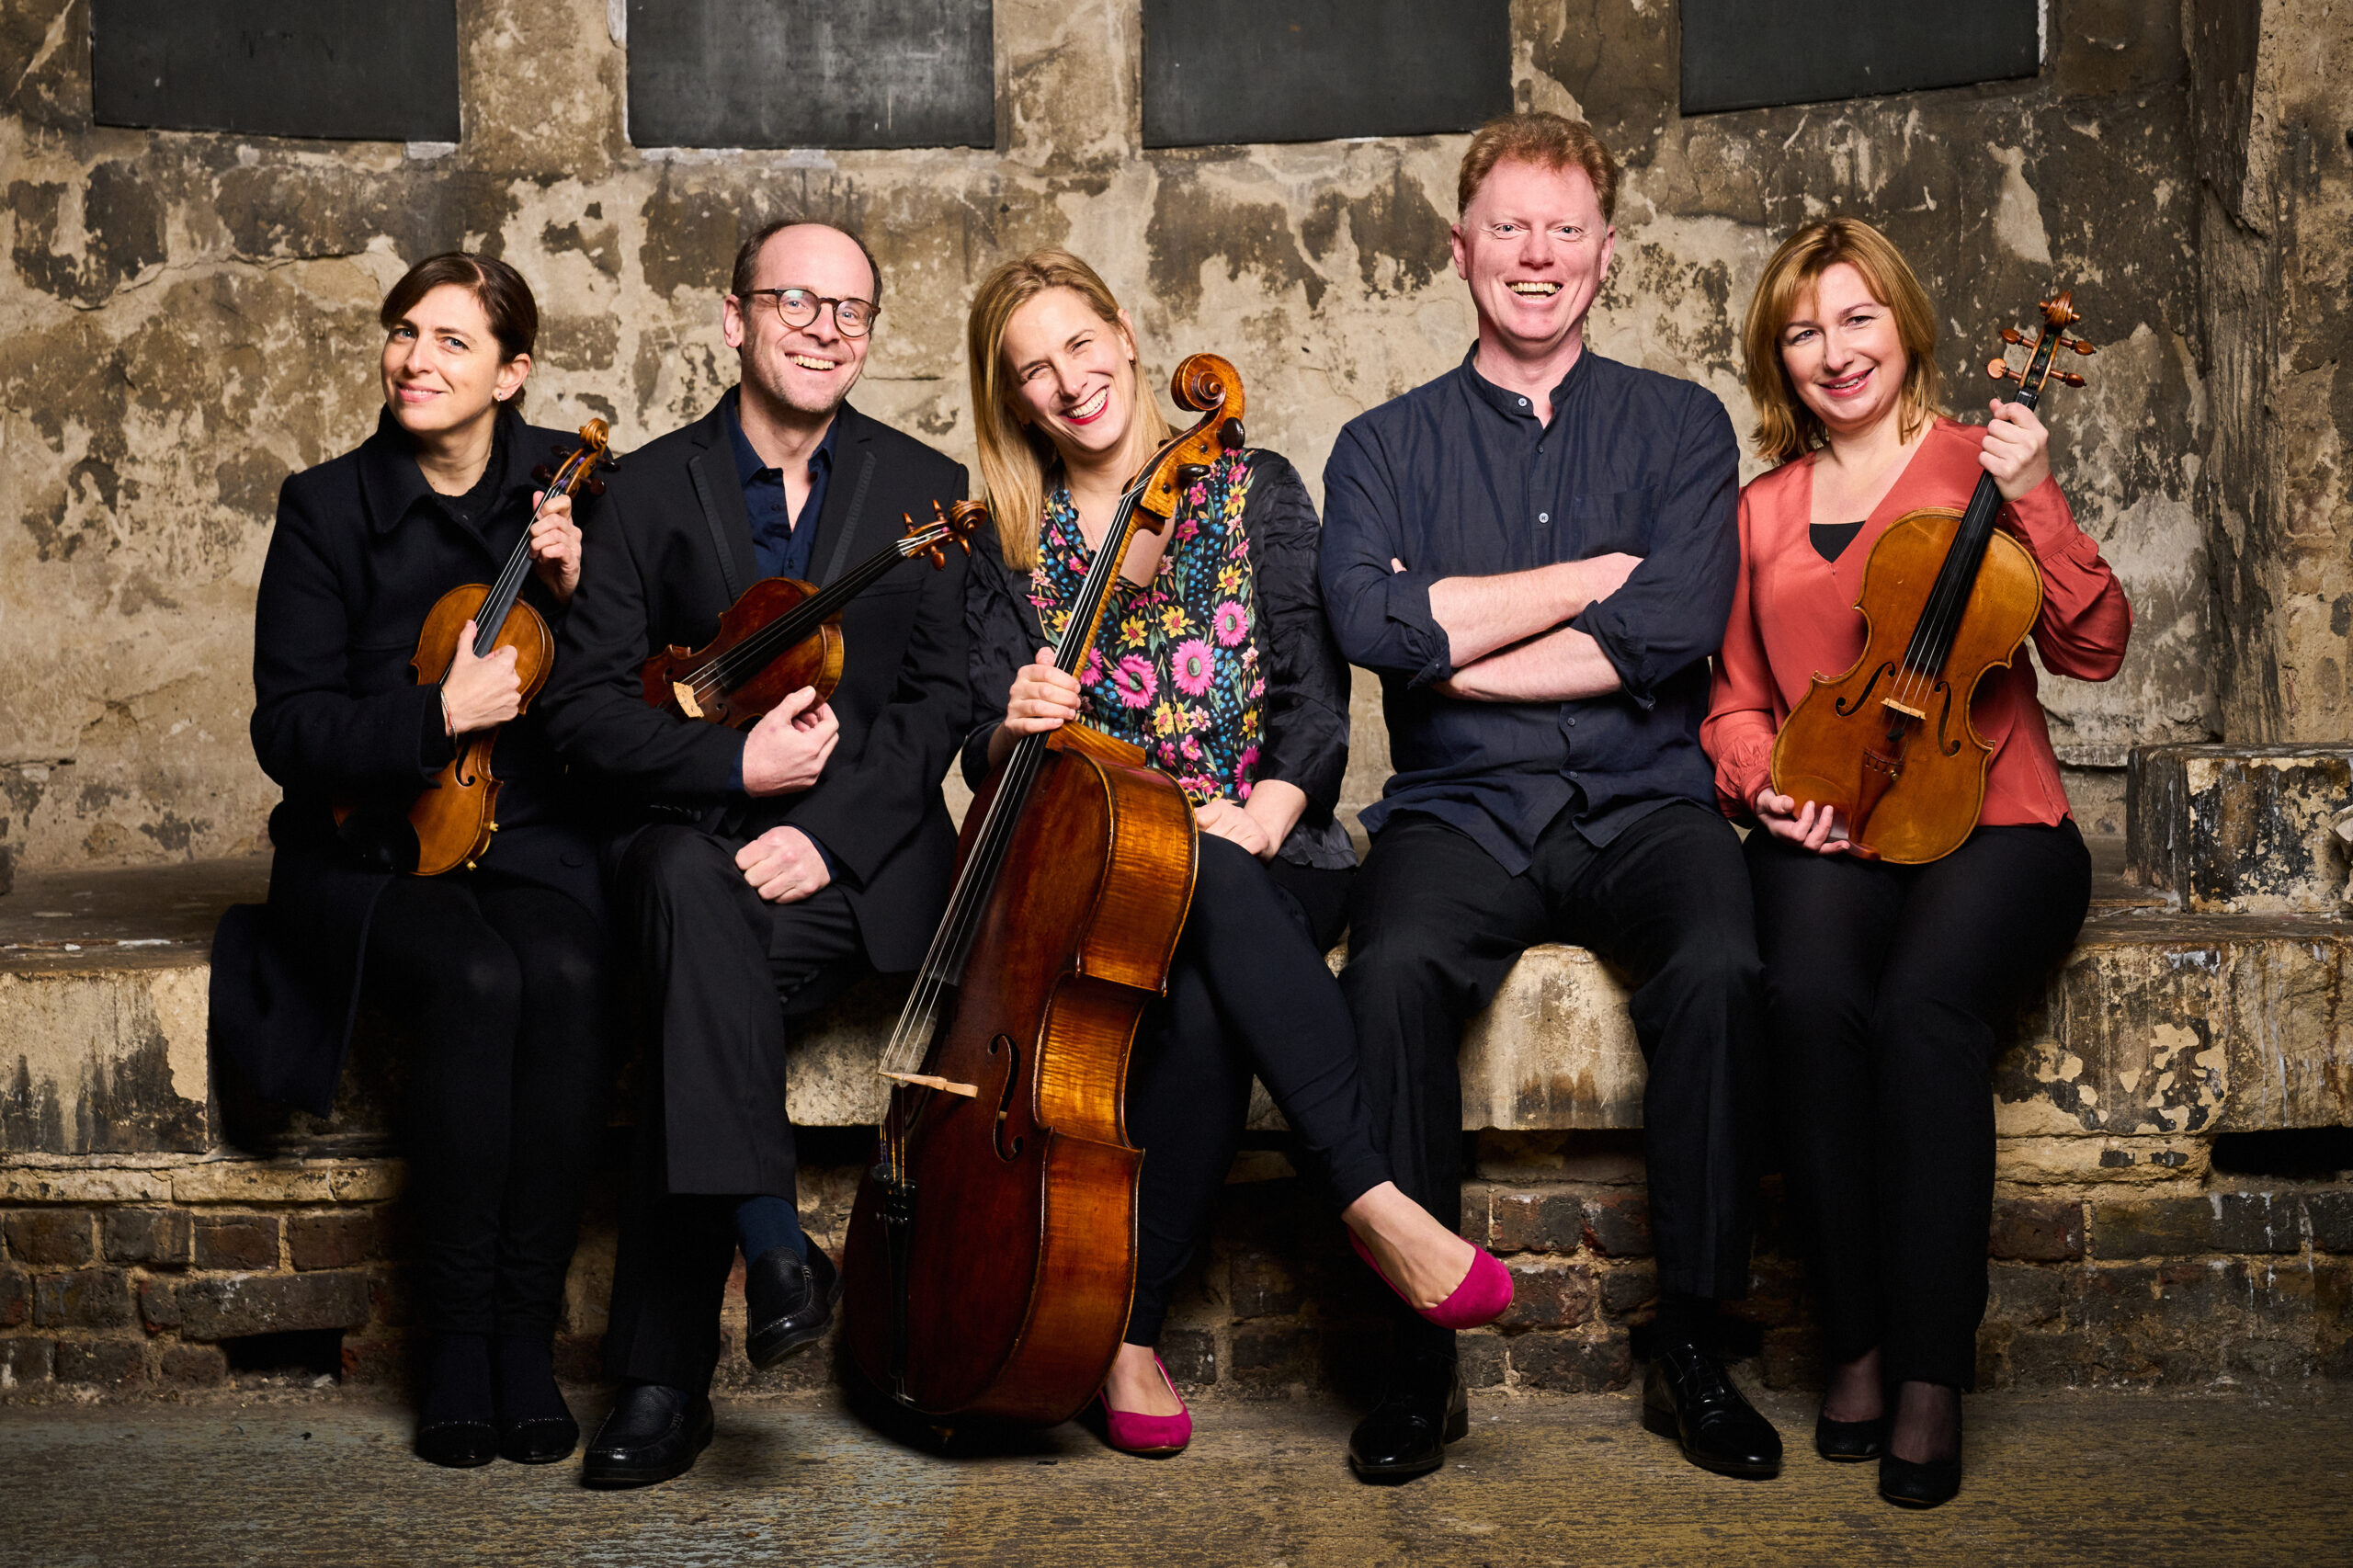 Five classical musicians from Ensemble 360 pose together, seated and smiling. They are our resident musicians in Sheffield and nationally.